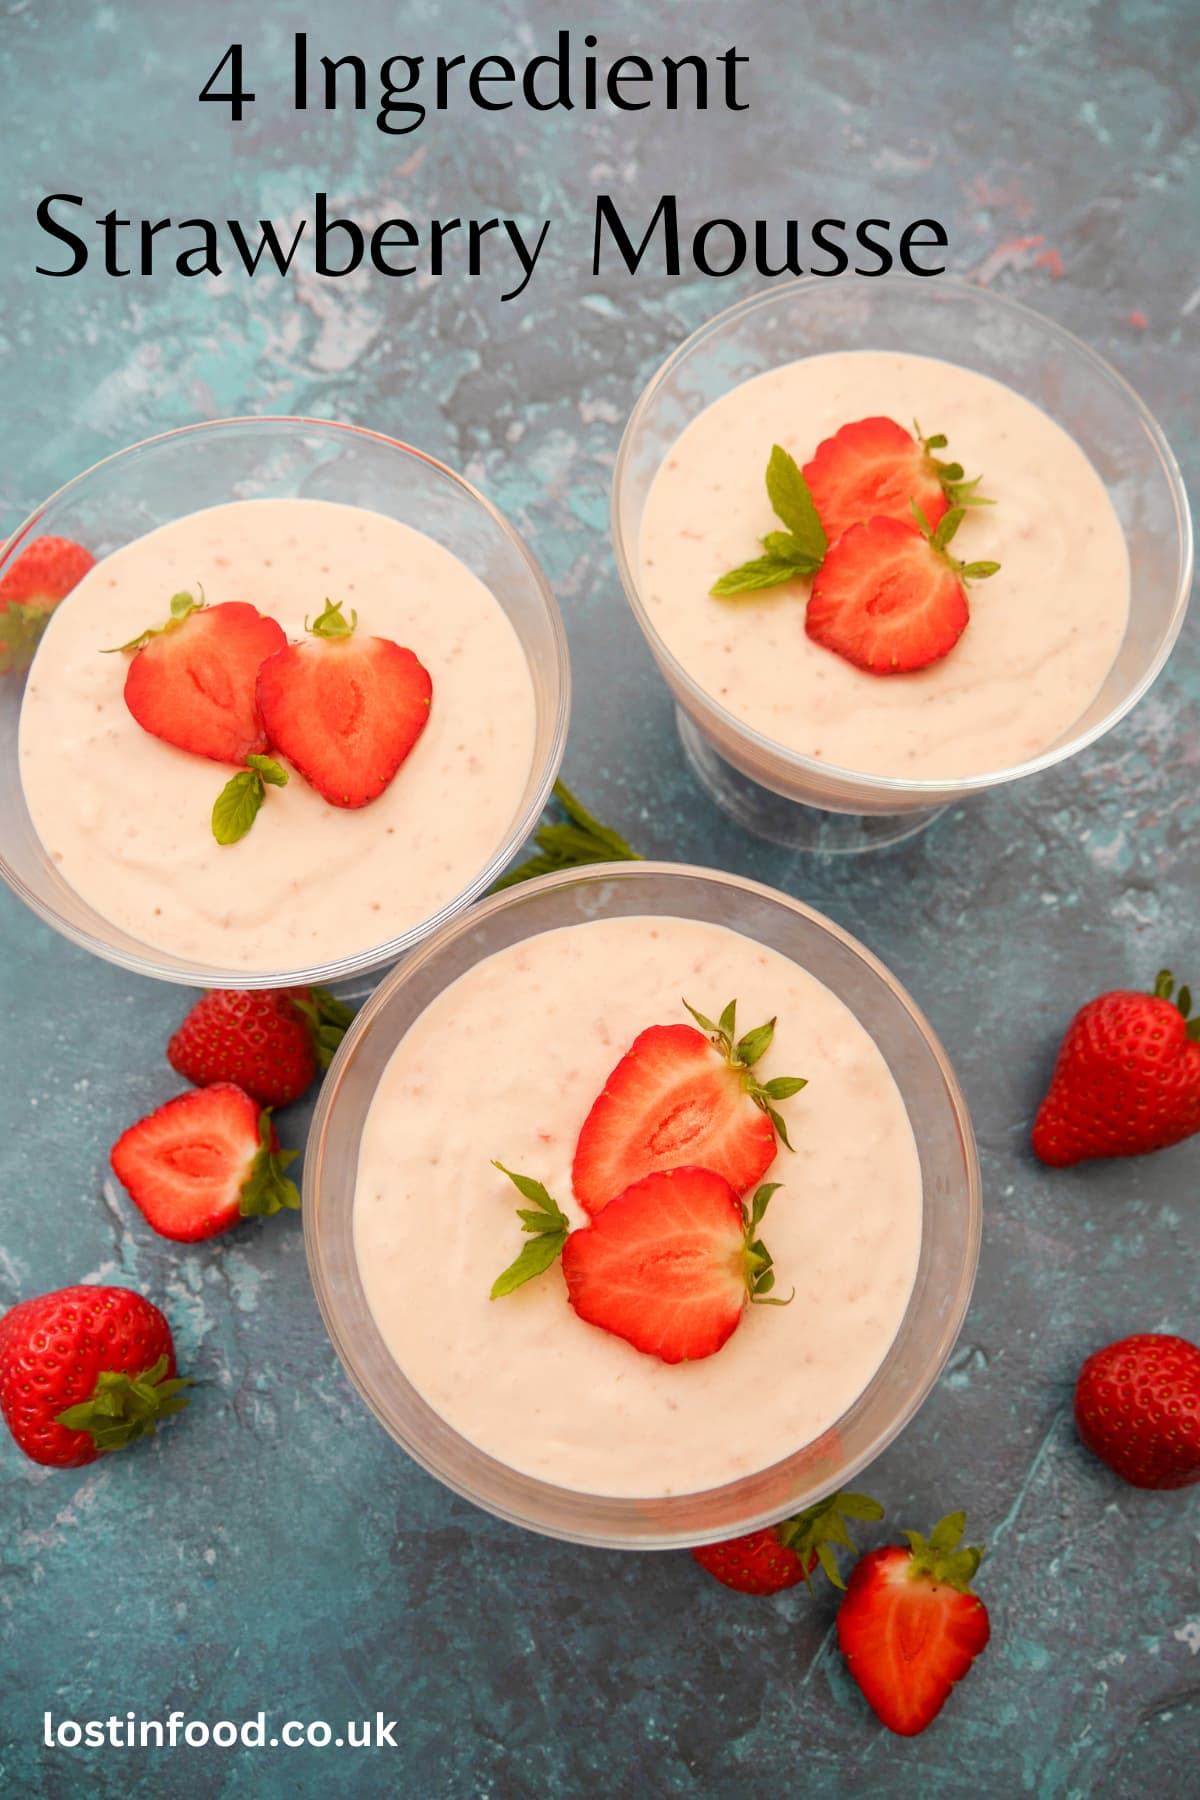 Pinnable image with recipe title and three individual glass serving dishes filled with strawberry mousse topped with sliced strawberries and mint leaves, with whole strawberries set alongside.